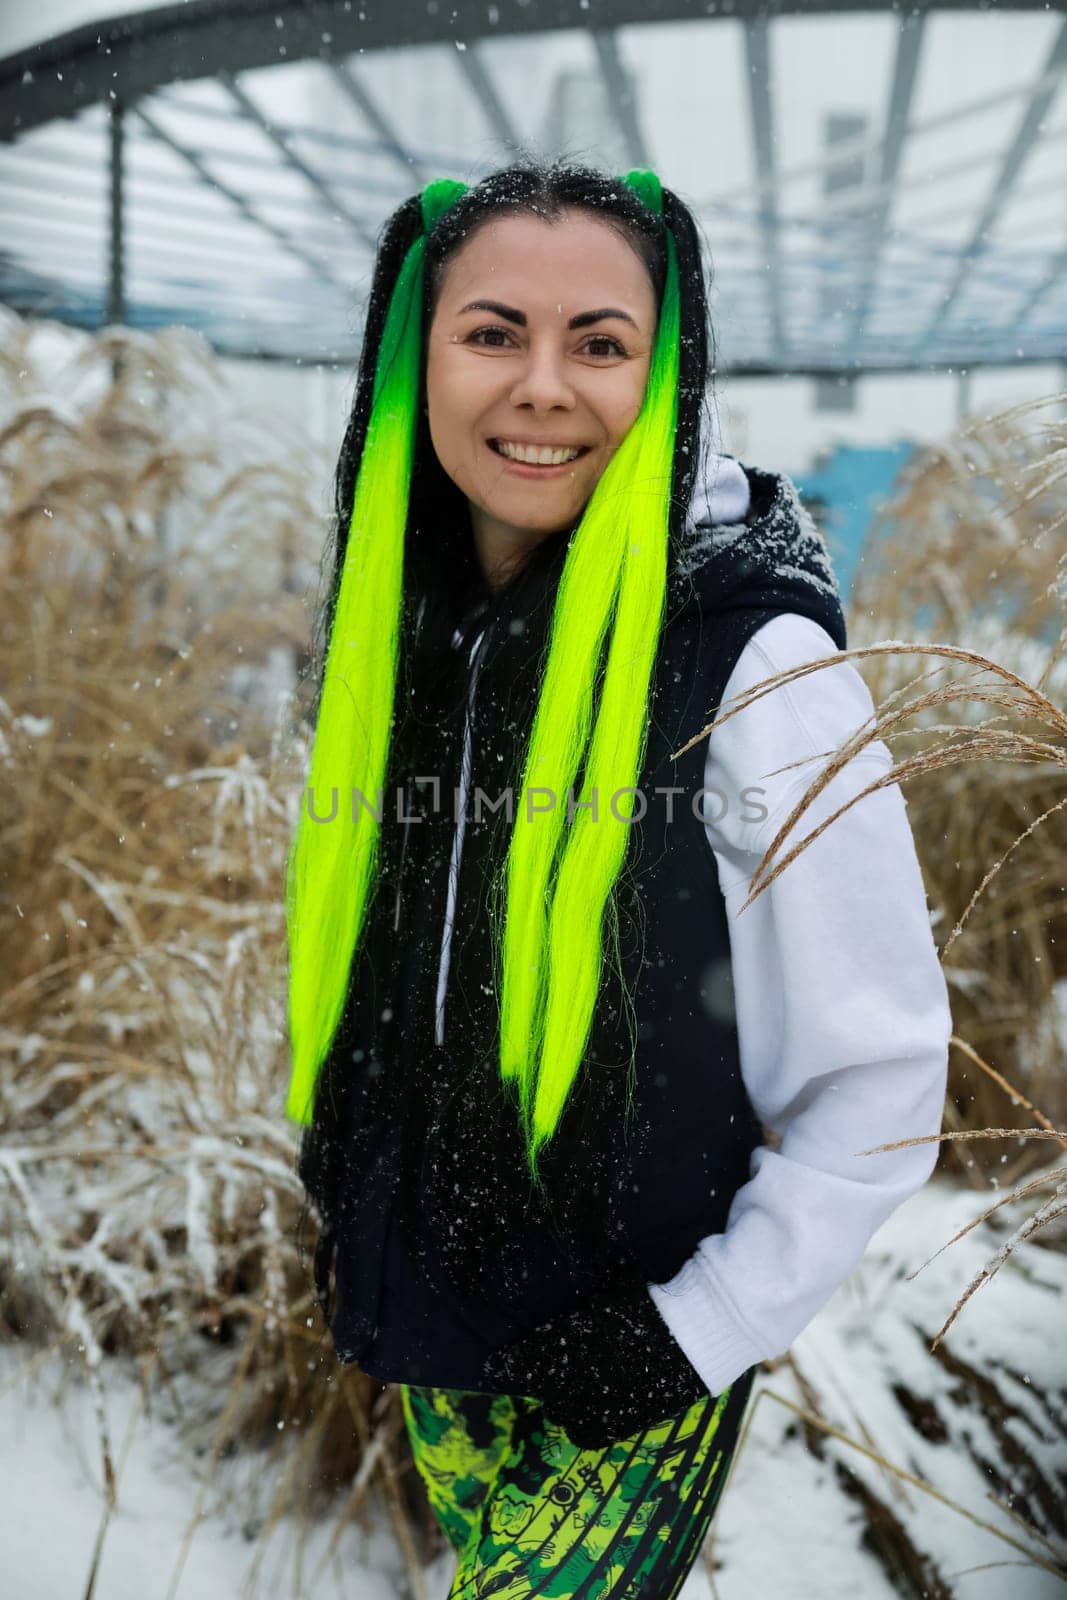 Woman With Green Hair Standing in the Snow by TRMK